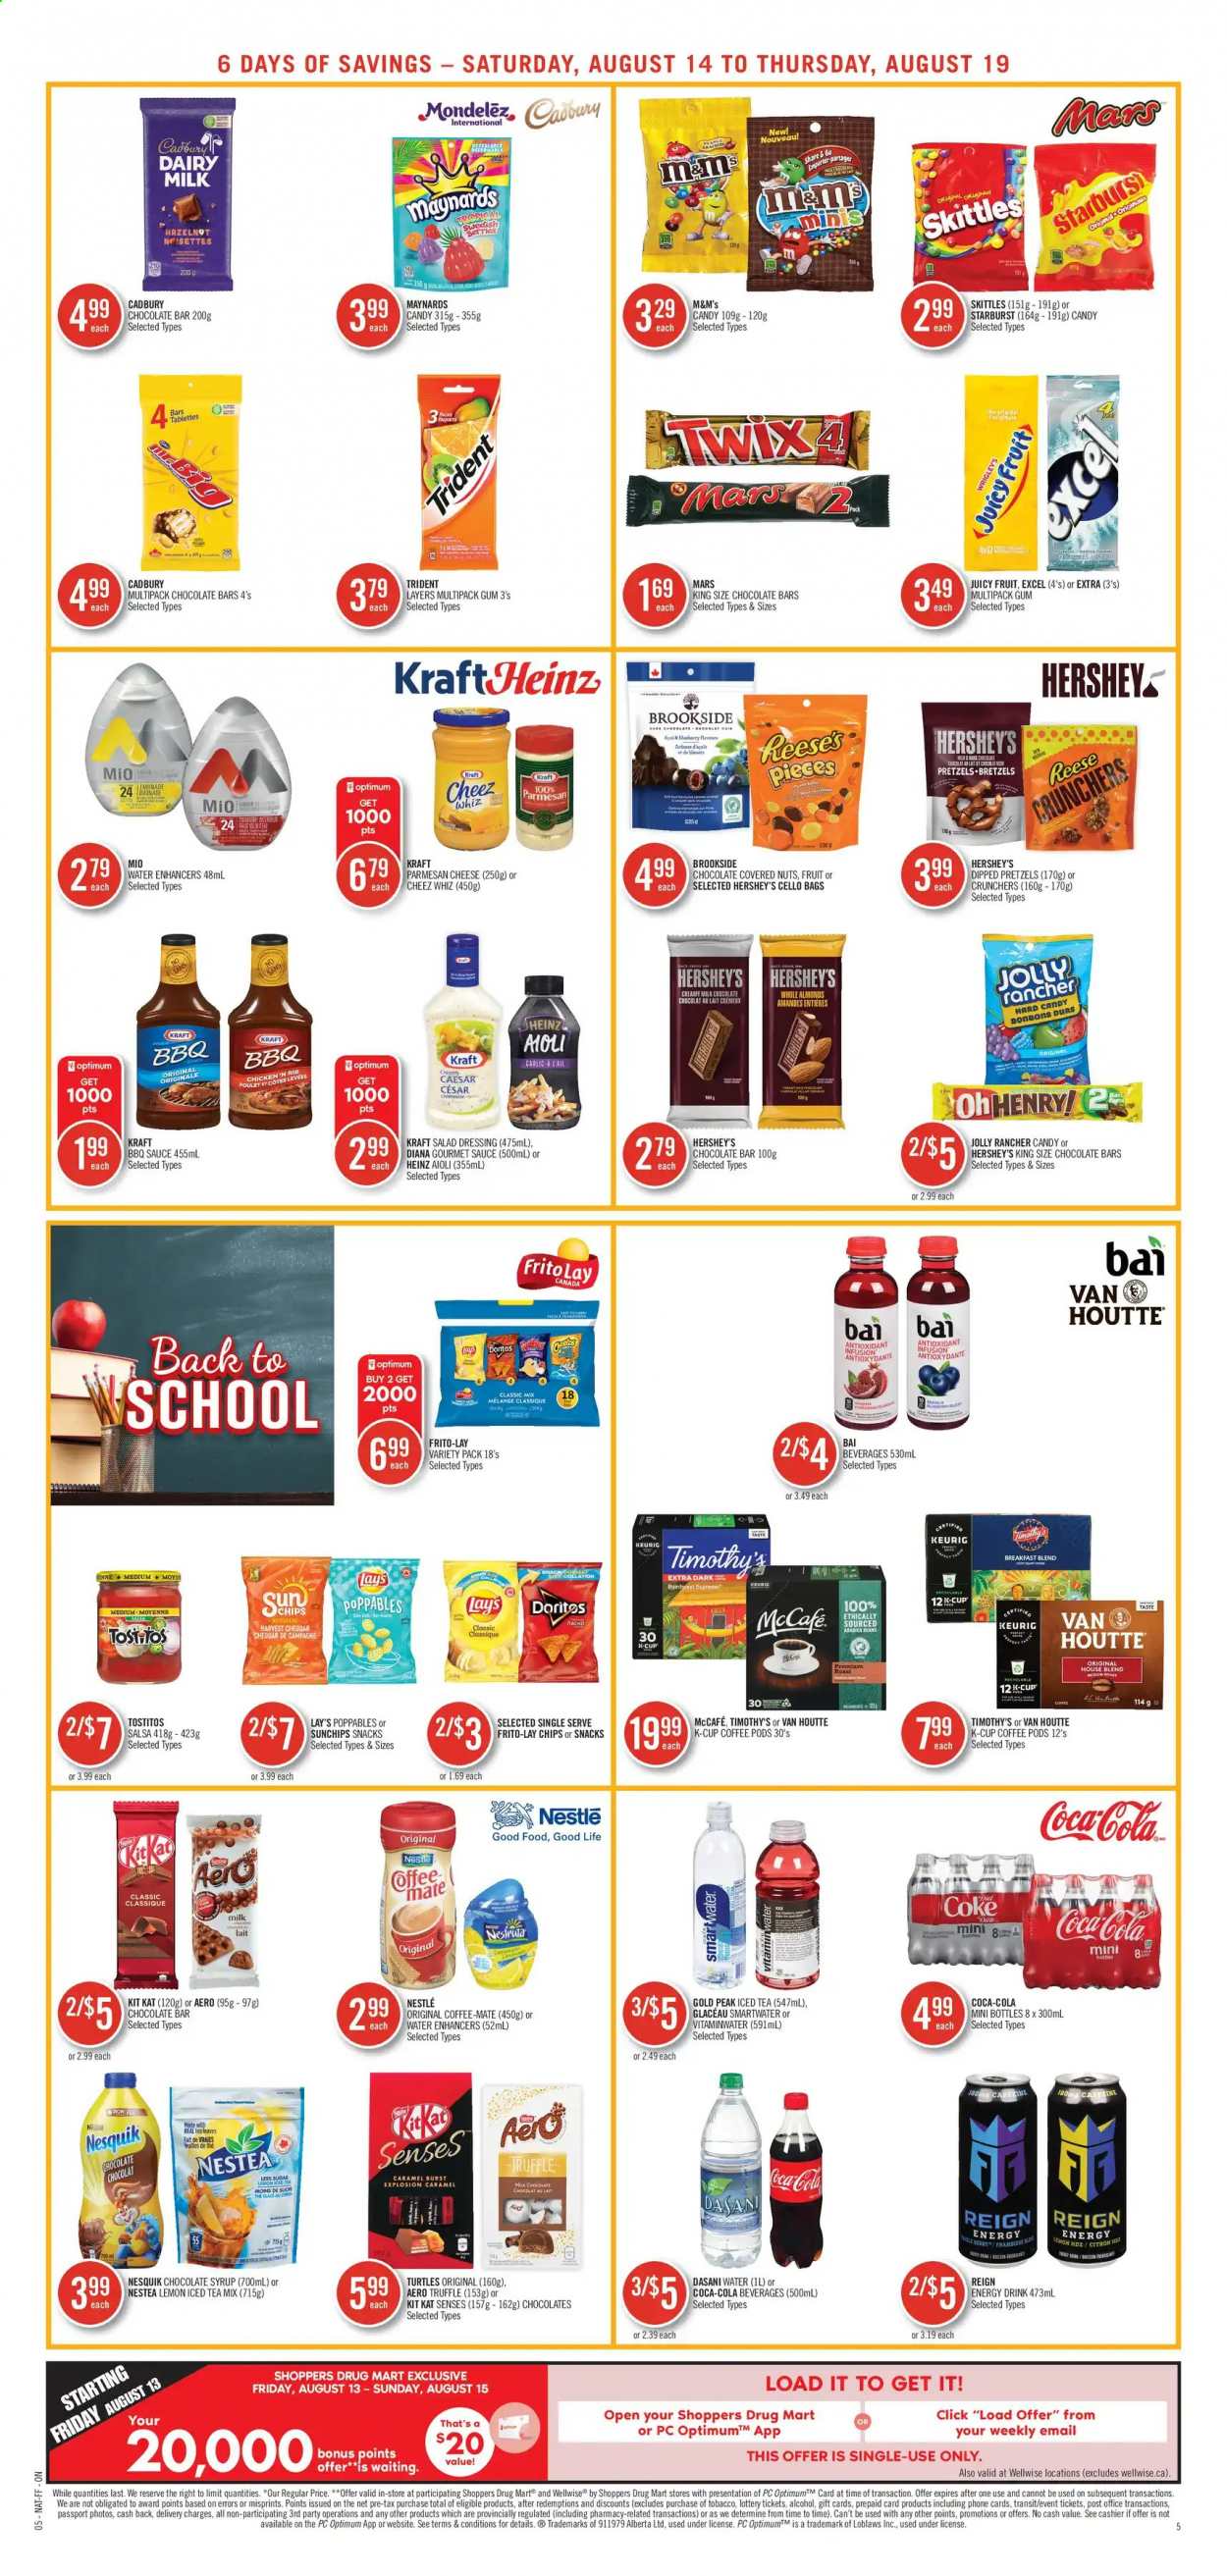 thumbnail - Shoppers Drug Mart Flyer - August 14, 2021 - August 19, 2021 - Sales products - pretzels, Mars, truffles, KitKat, Reese's, Hershey's, Cadbury, Dairy Milk, Skittles, Trident, Starburst, chocolate bar, Doritos, Lay’s, Frito-Lay, Tostitos, Heinz, sauce, Good Life, BBQ sauce, salad dressing, dressing, salsa, Kraft®, chocolate syrup, syrup, Coca-Cola, energy drink, ice tea, Bai, Smartwater, coffee pods, coffee capsules, McCafe, K-Cups, Keurig, breakfast blend, alcohol, Nestlé, Nesquik, chips, M&M's. Page 9.